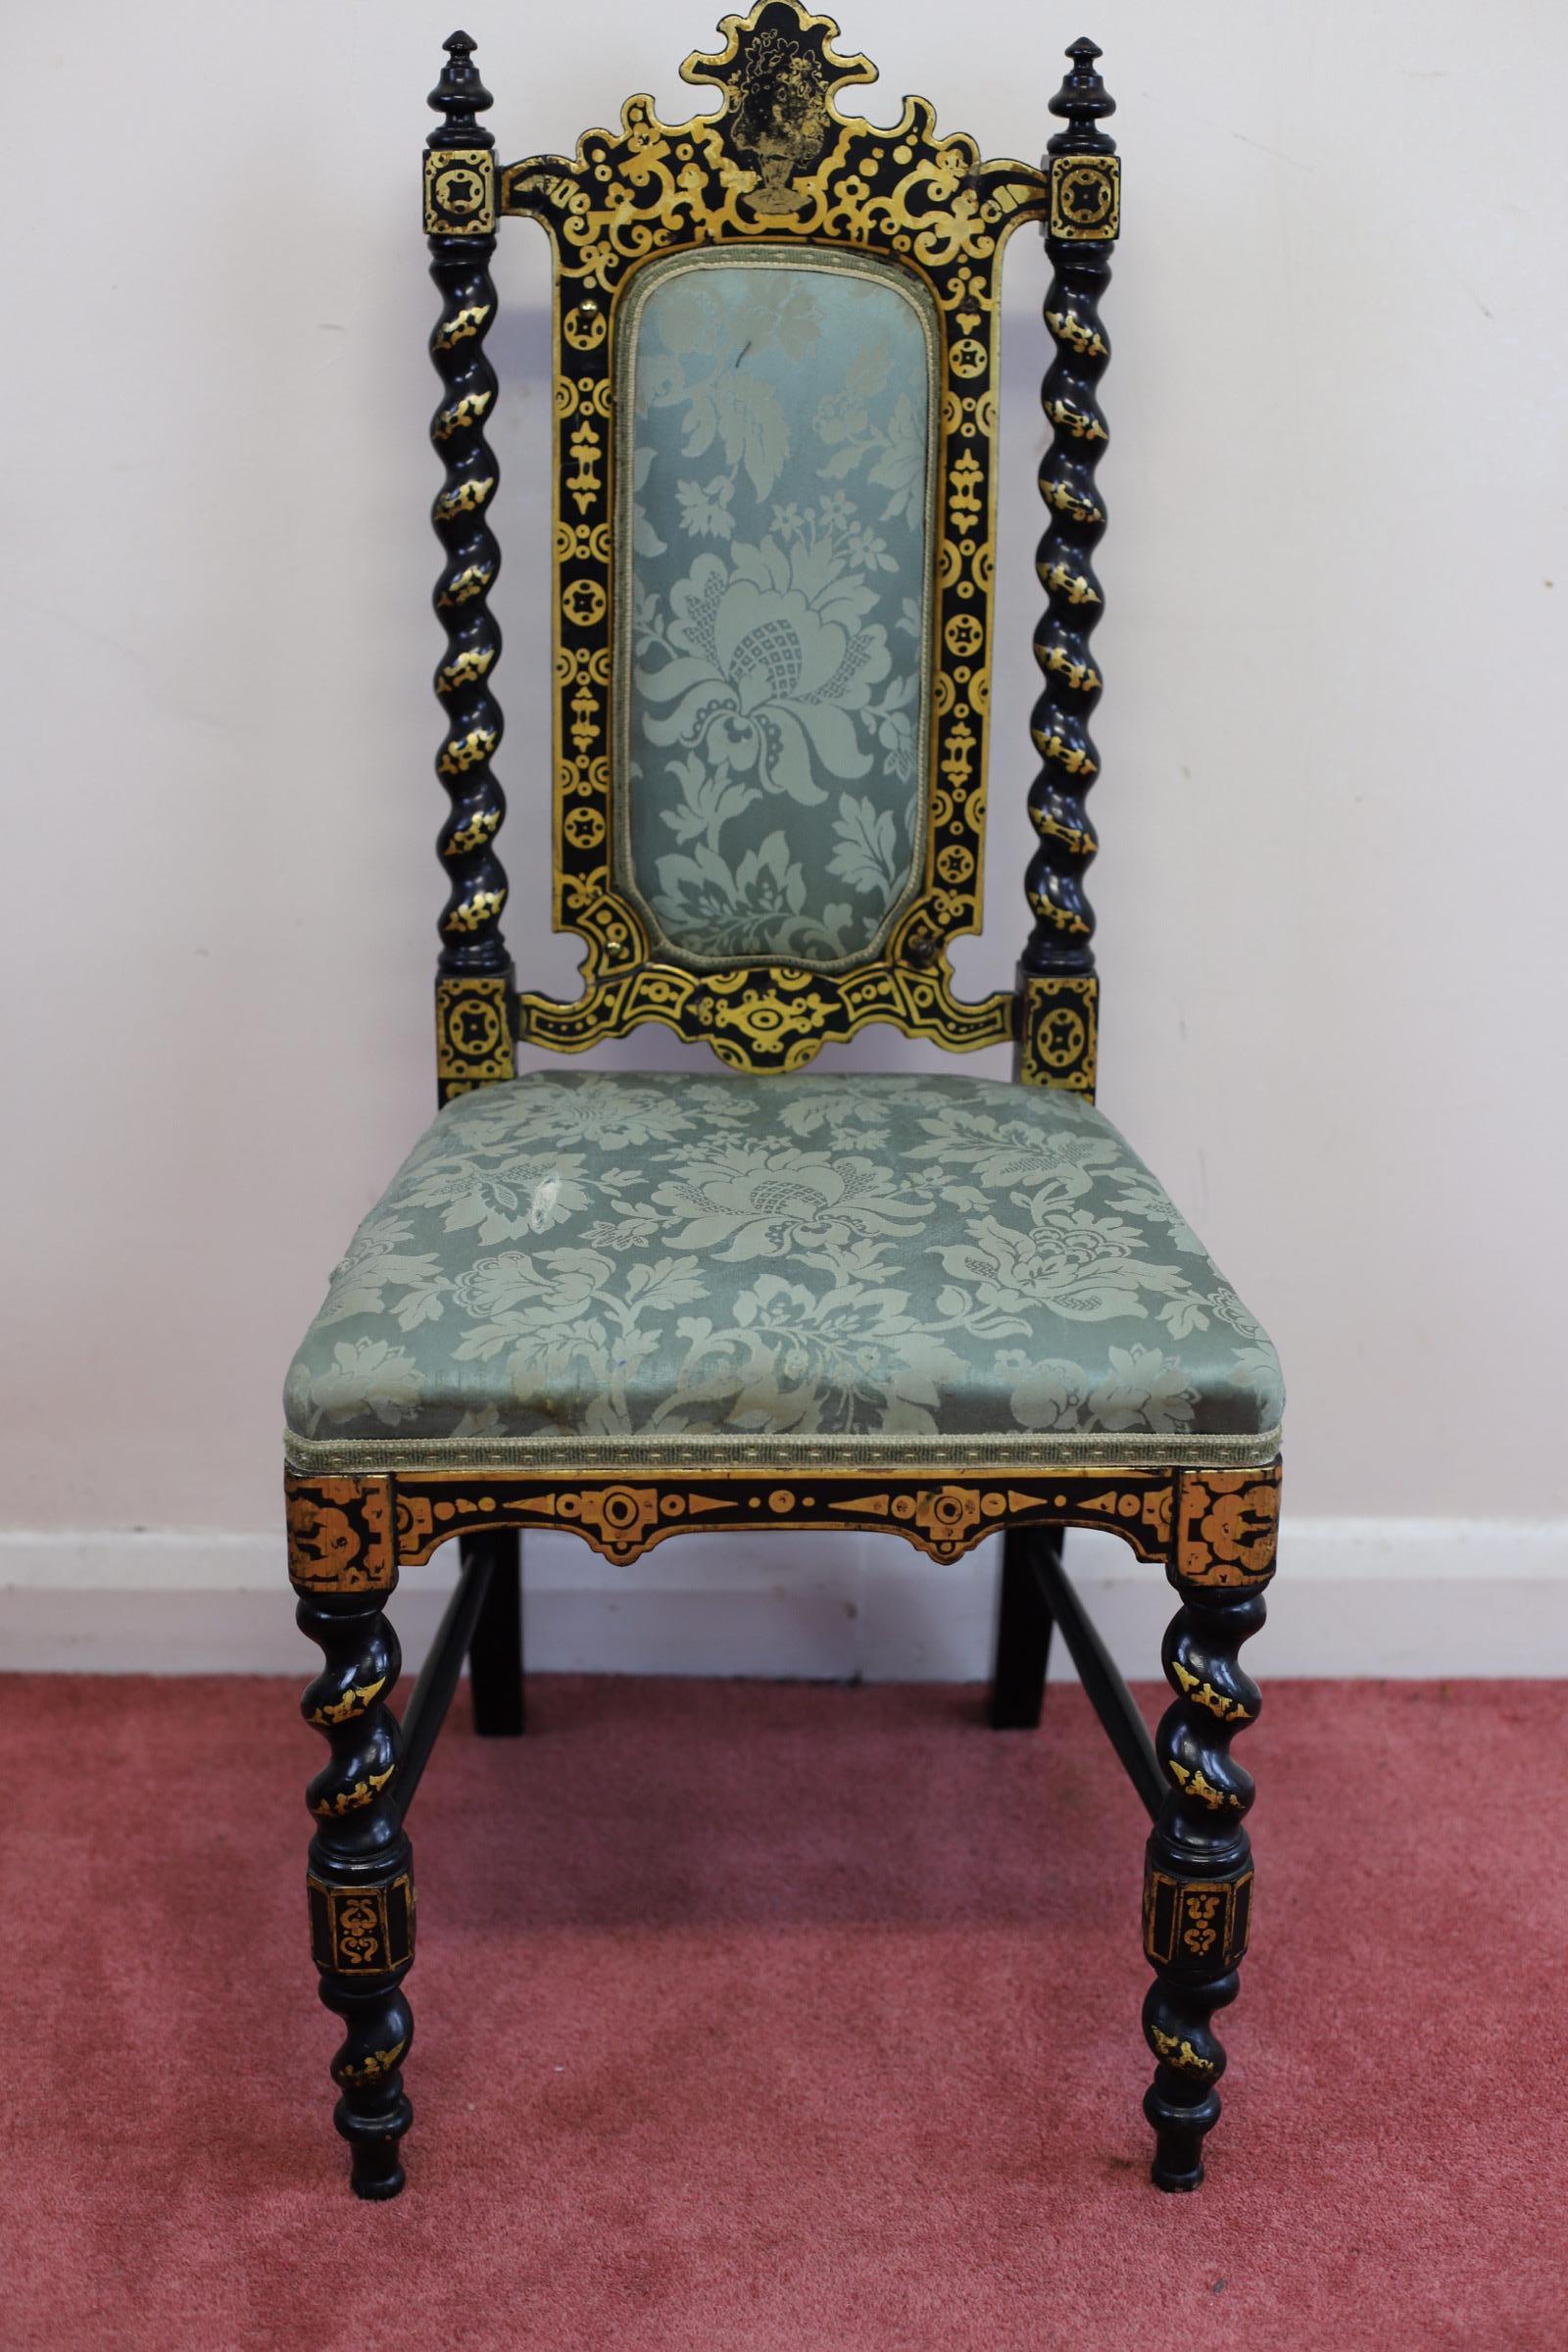 We delight to offer for sale this Stunning early Victorian ebonised and gilt painted papier mache hall chair with upholstered seat and back raised on spiral turned supports . Circa 1830-1850 
Don't hesitate to contact me if you have any